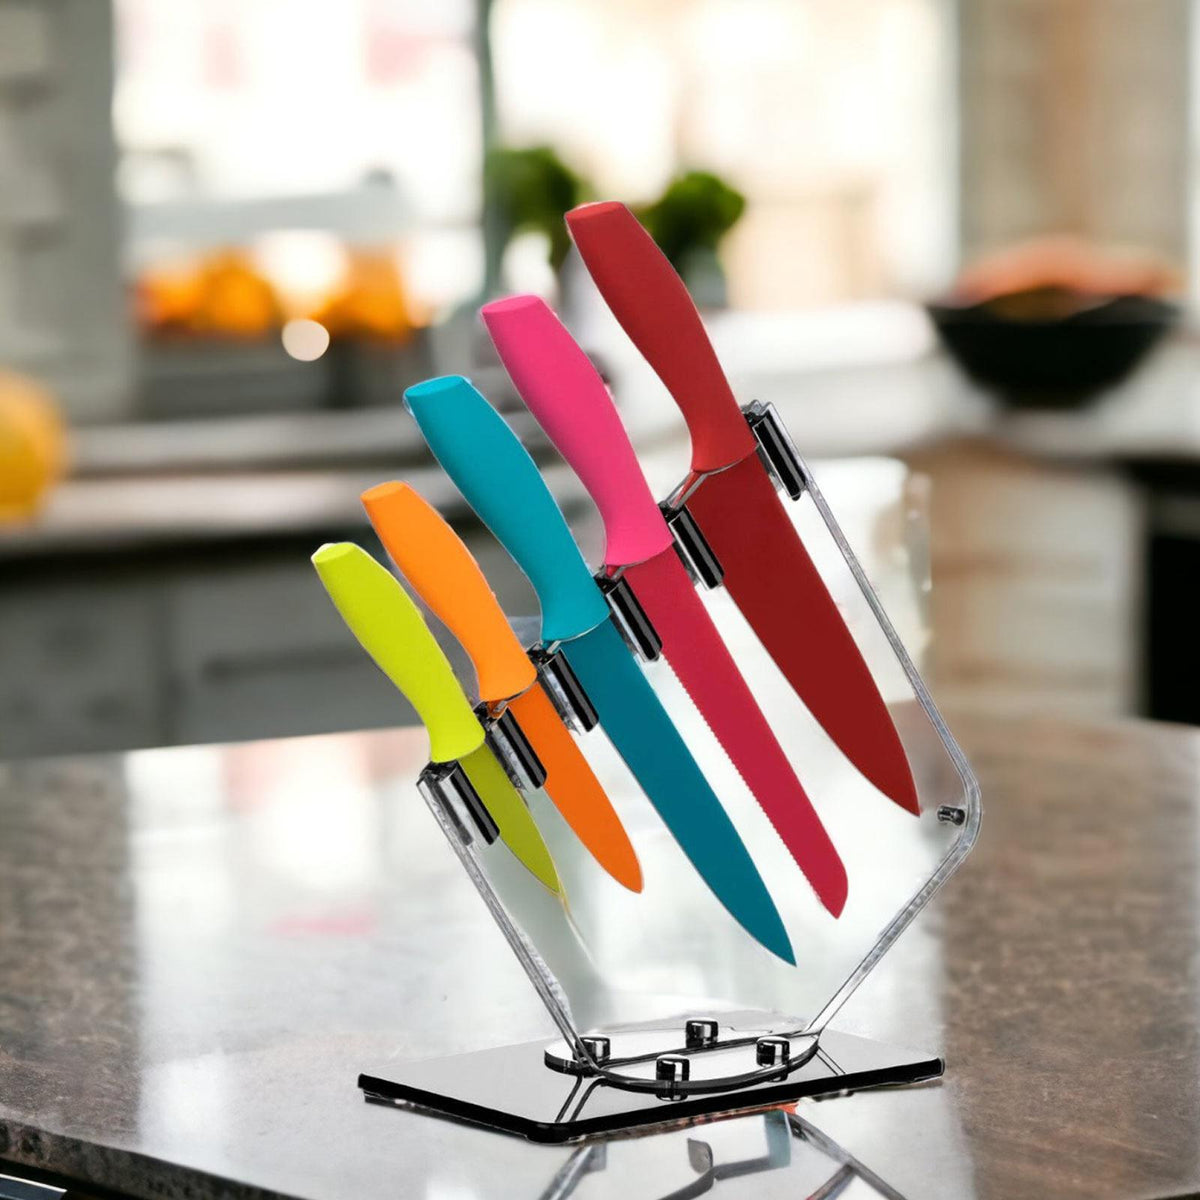 Shop online at Colourful 5 Piece Knife Clear Block Set Aubina . Today you  can shop for the latest fashions and top brands on the internet